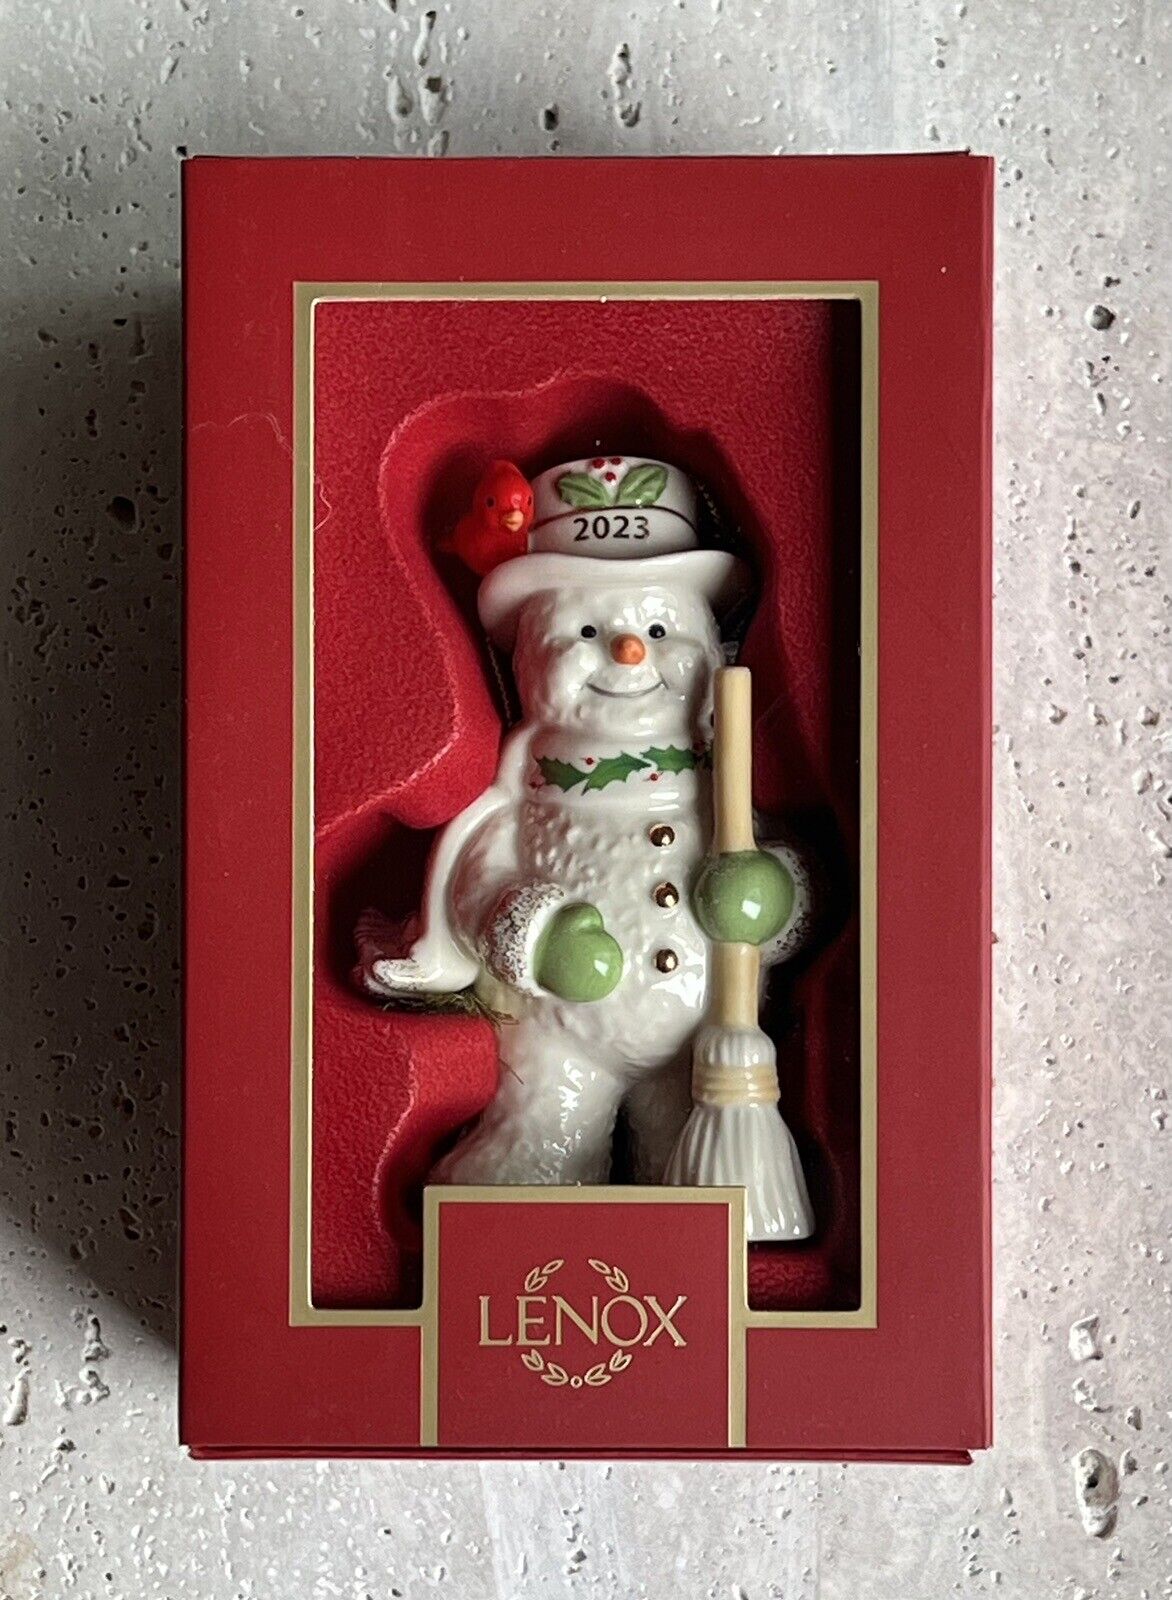 Lenox 2023 Annual SNOWMAN Ornament NEW in BOX Snowman with Broom 1st Quality